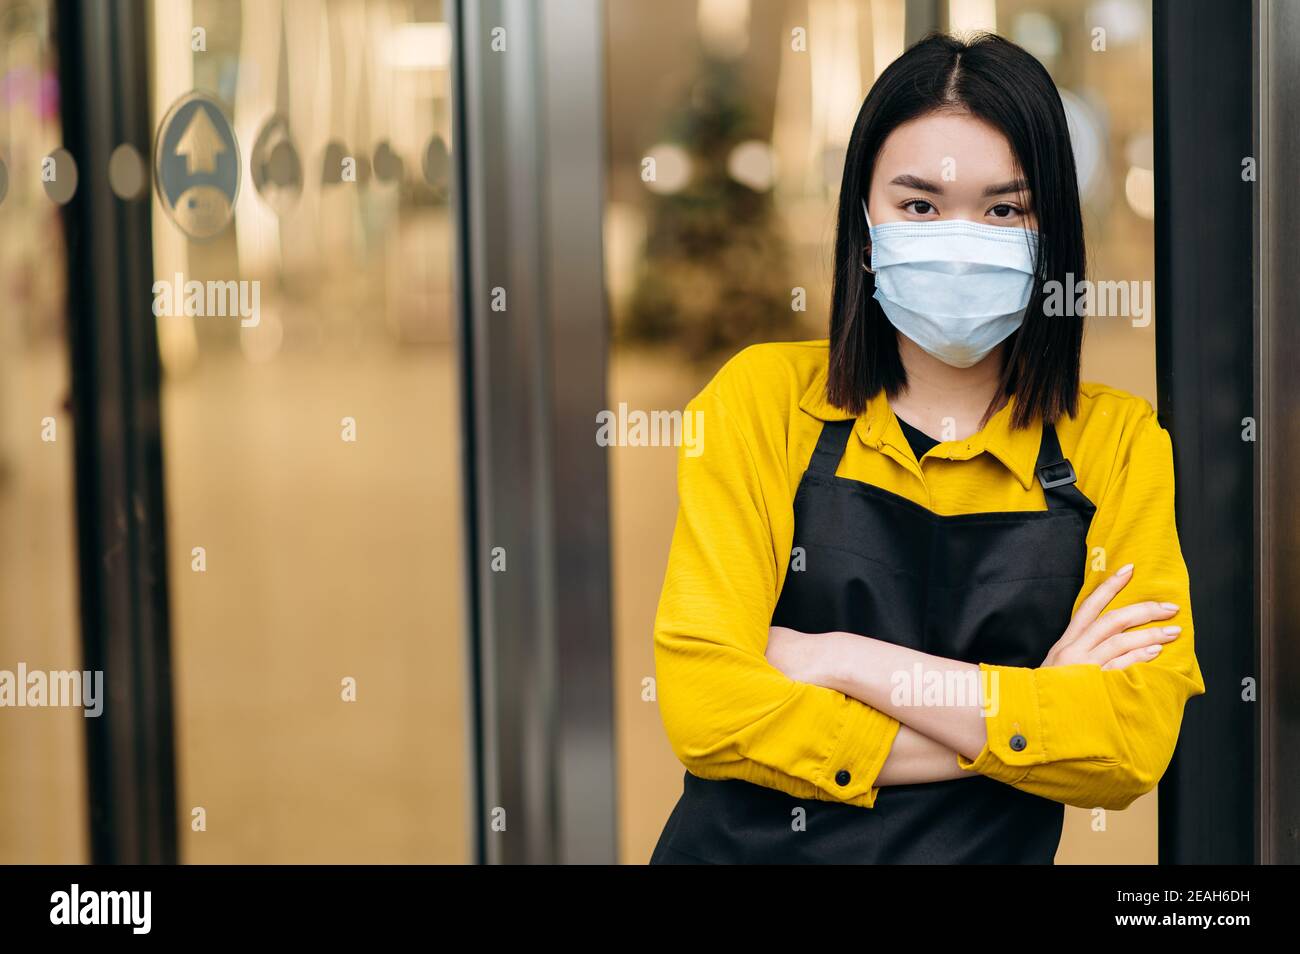 A young asian woman waitress or owner of a restaurant, cafe or shop in a protective mask and an apron stands at the entrance. Small business amid the coronavirus pandemic Stock Photo